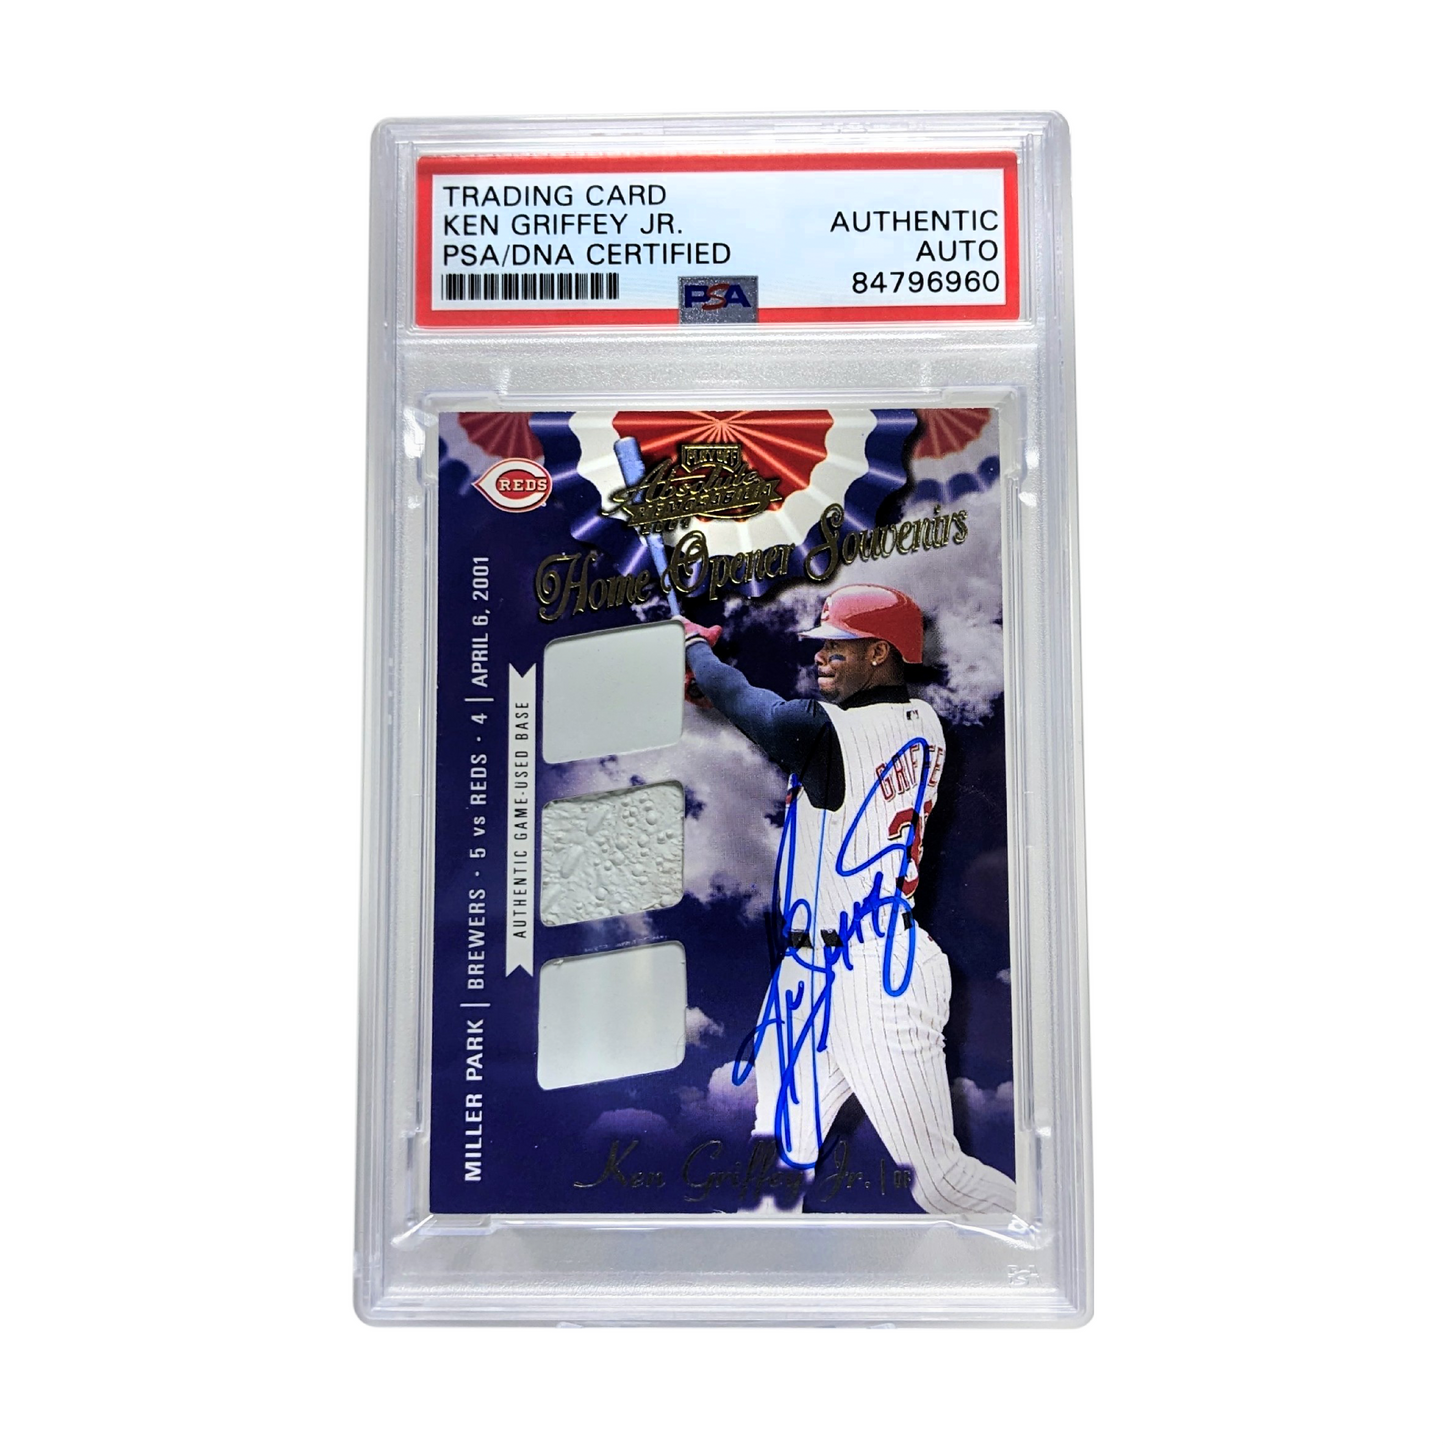 Ken Griffey Jr 2001 Playoff Absolute Home Opener Souvenirs Game Used Bases 40 of 75 Autographed Card - PSA Encapsulated Authentic Auto